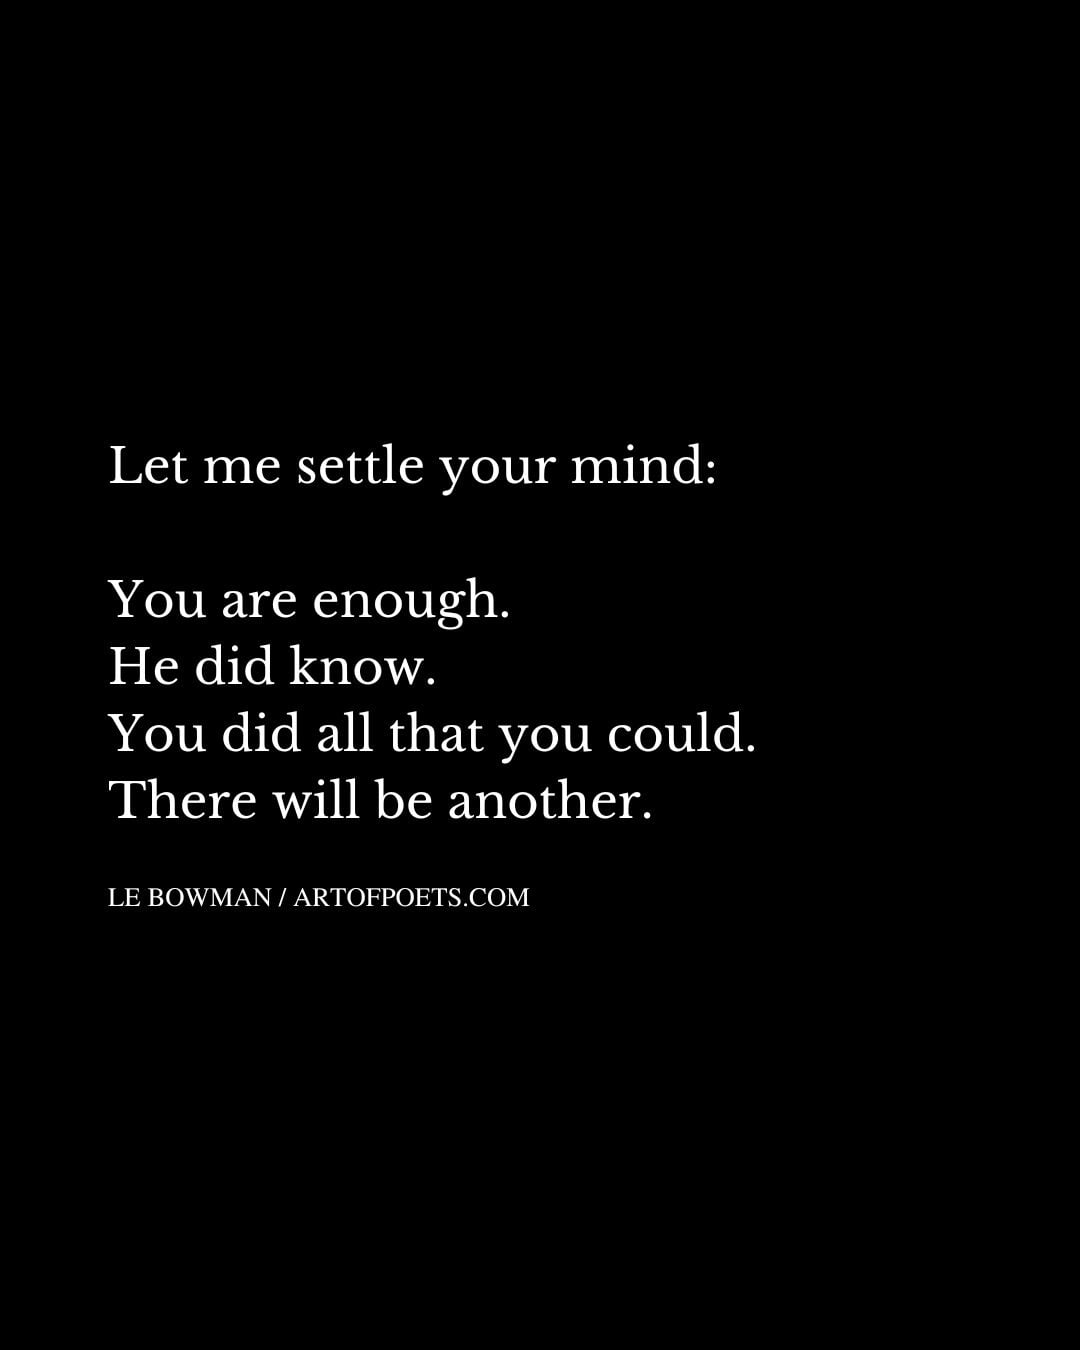 Let me settle your mind You are enough. He did know. You did all that you could. There will be another